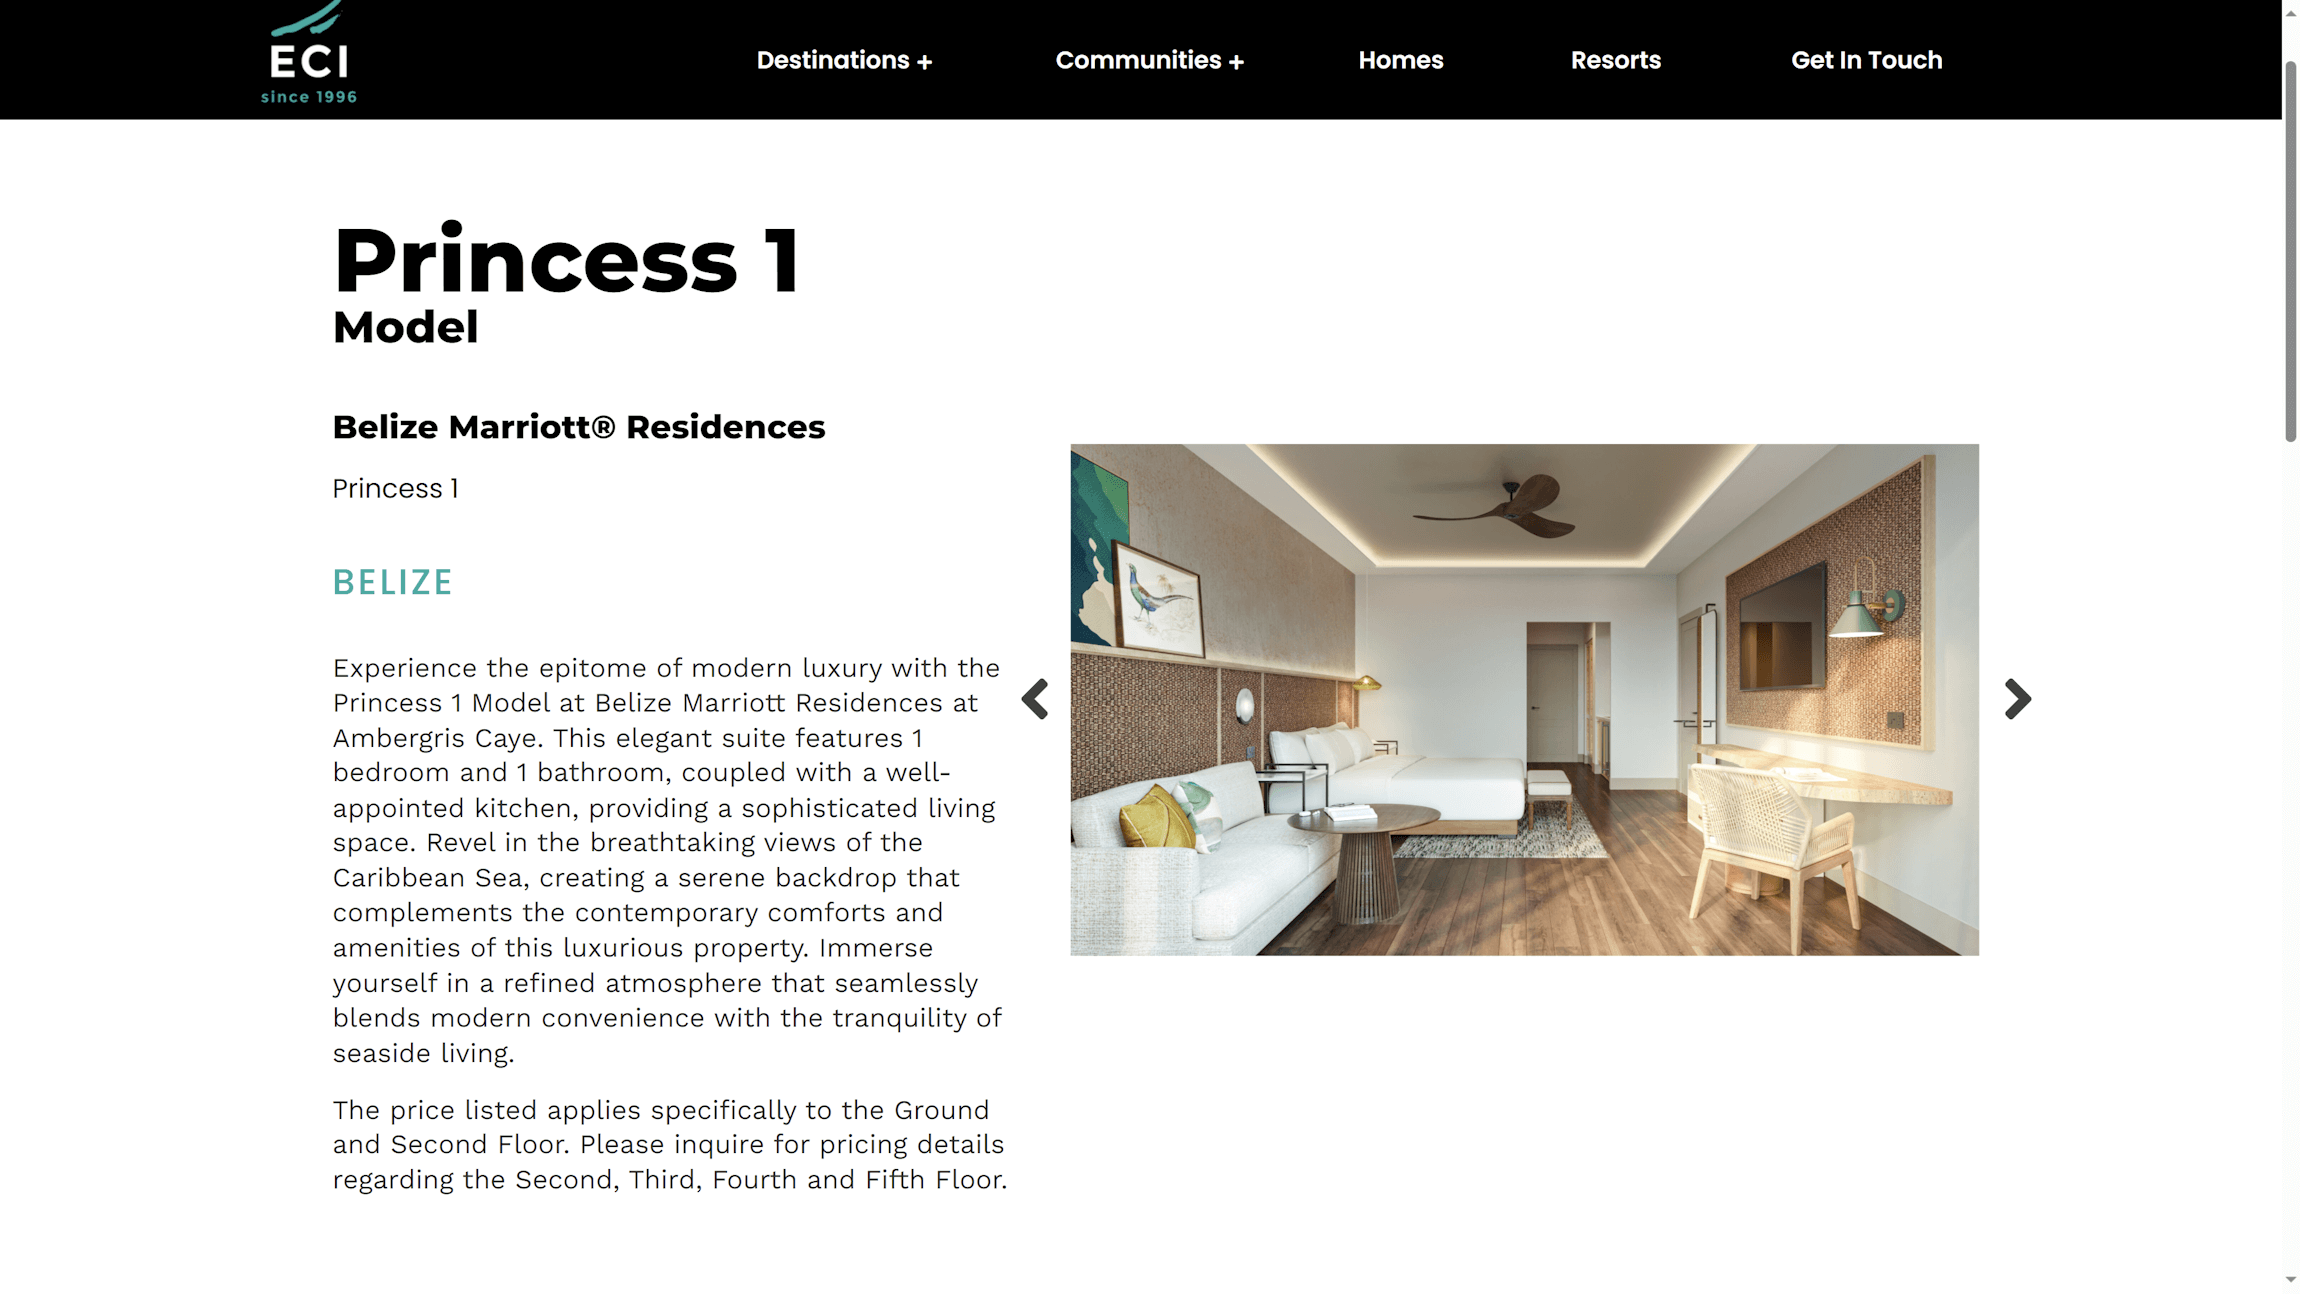 Interior Renders in a Promo Article